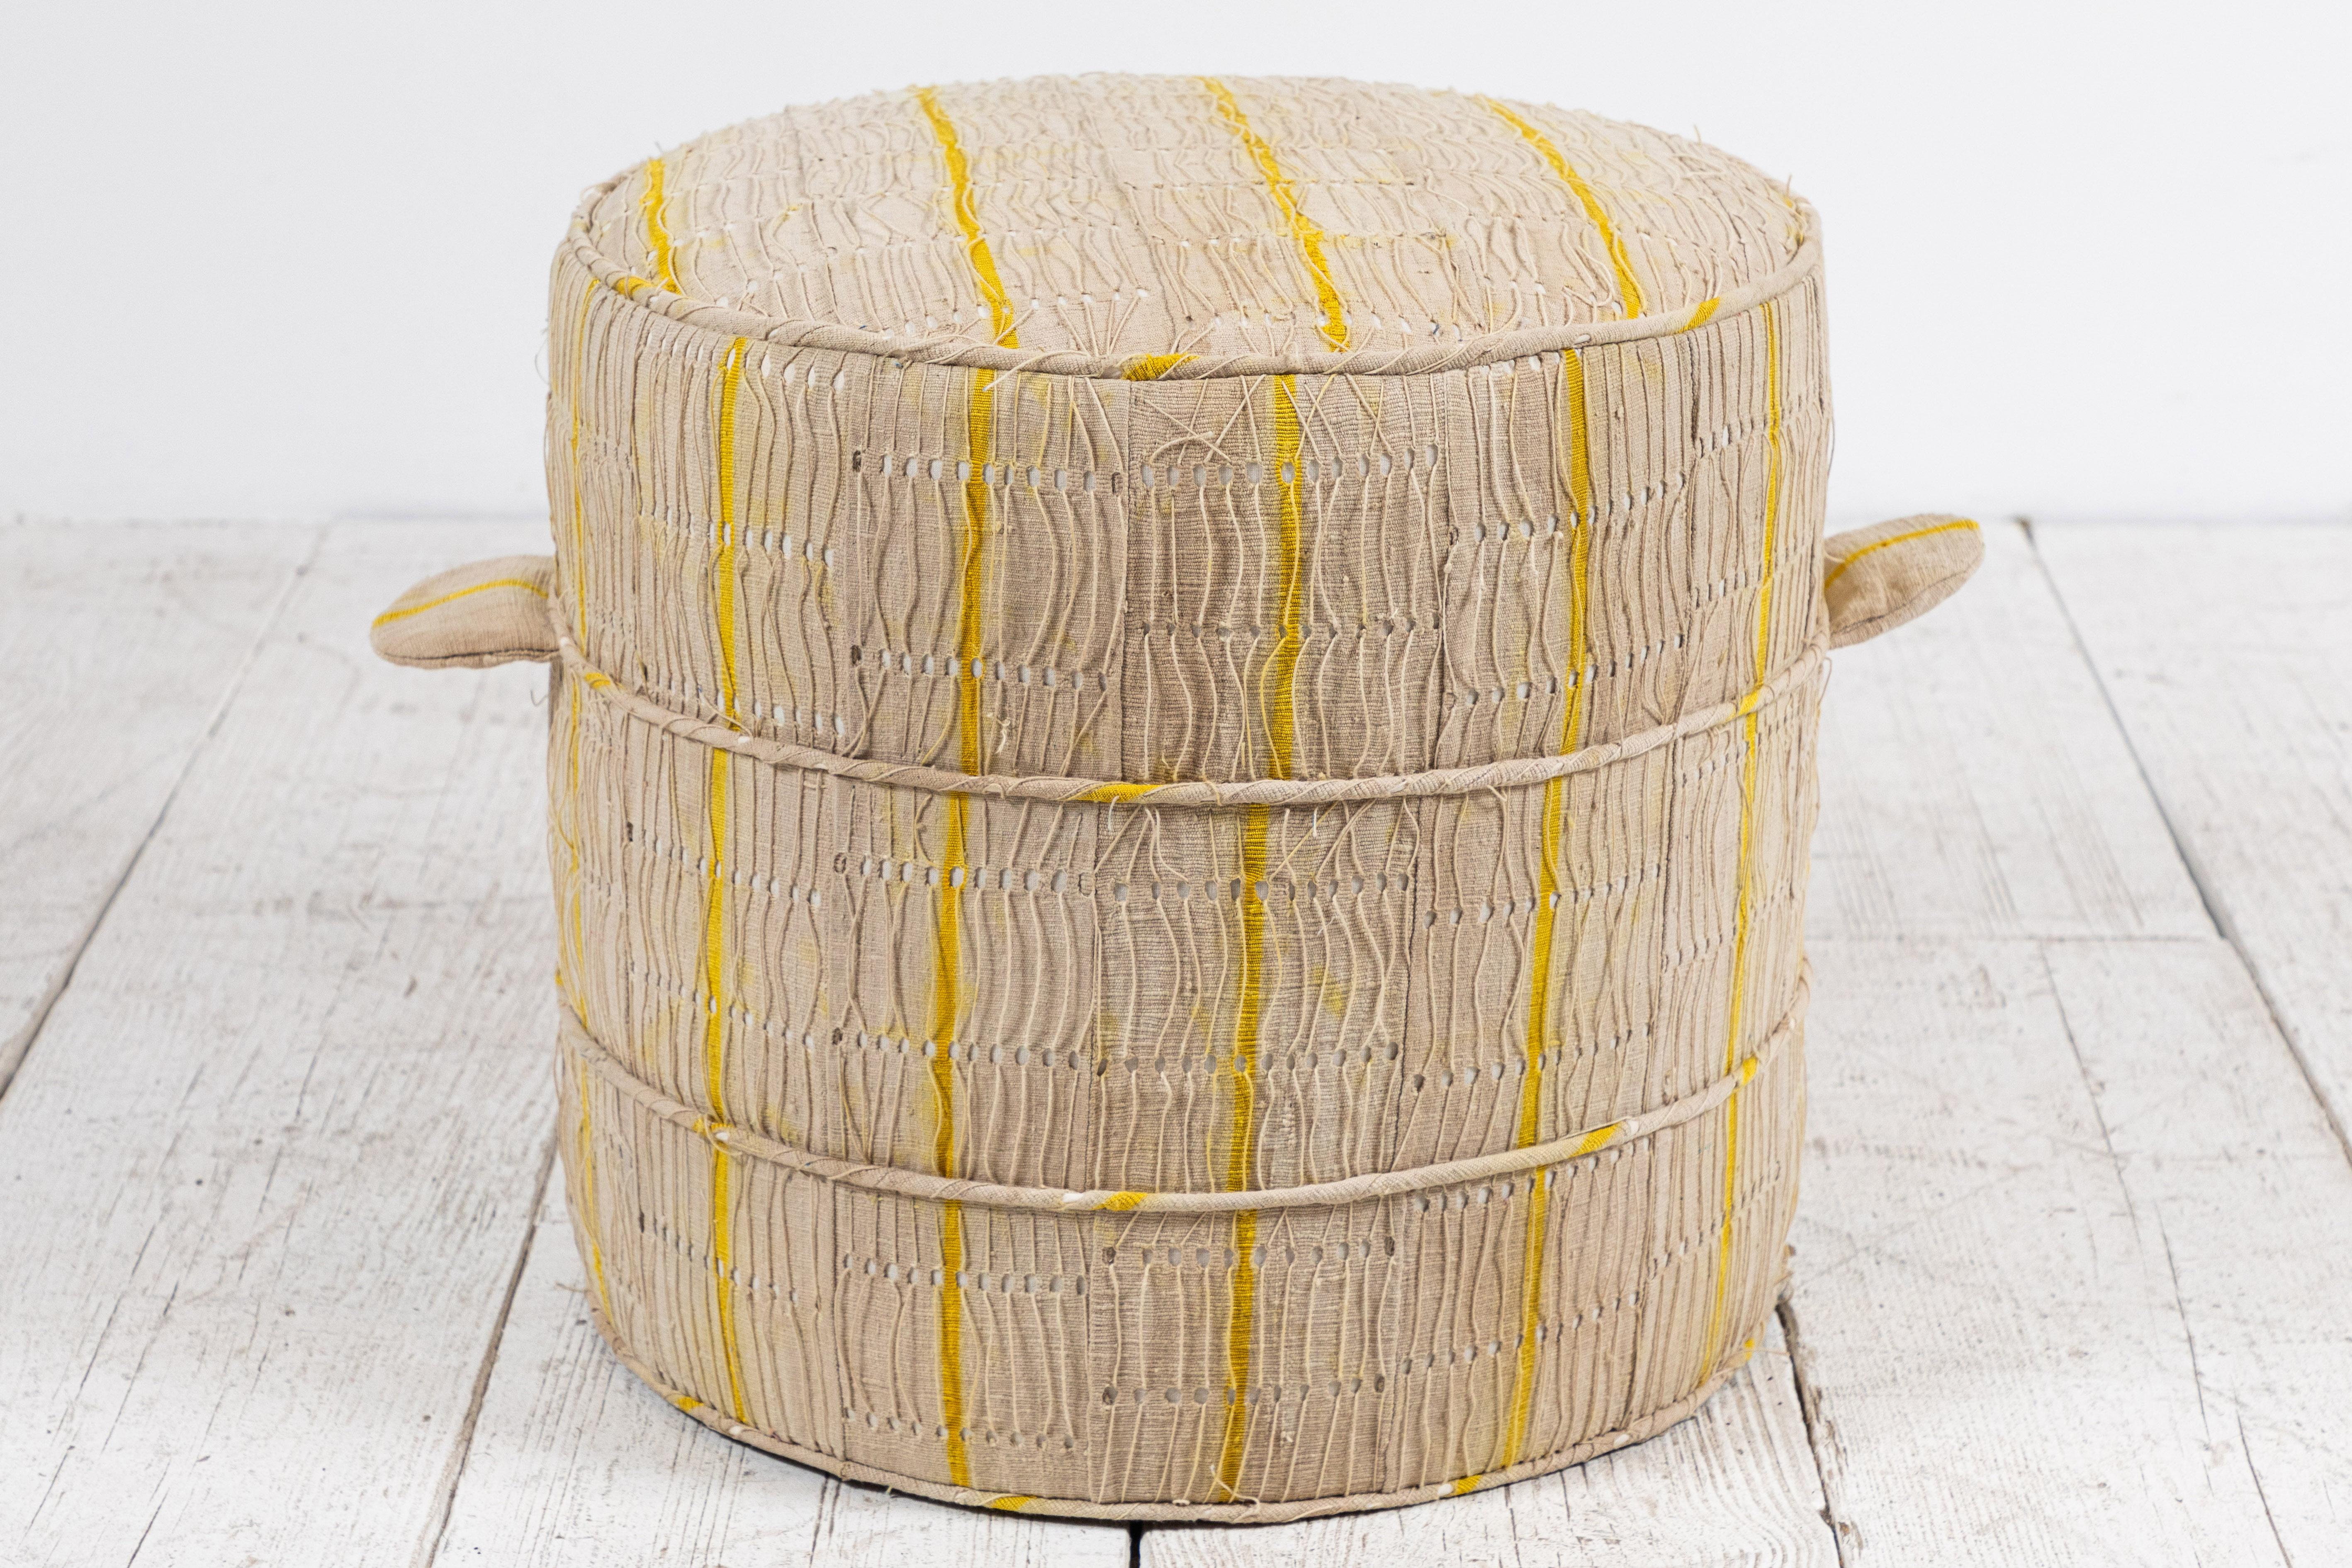 Solid wood frame and upholstered hassock with two ring piping and double handle details offers versatility in accent seating. Please enquire regarding custom sizes.

This specific Hassock is upholstered in a one of a kind African natural and